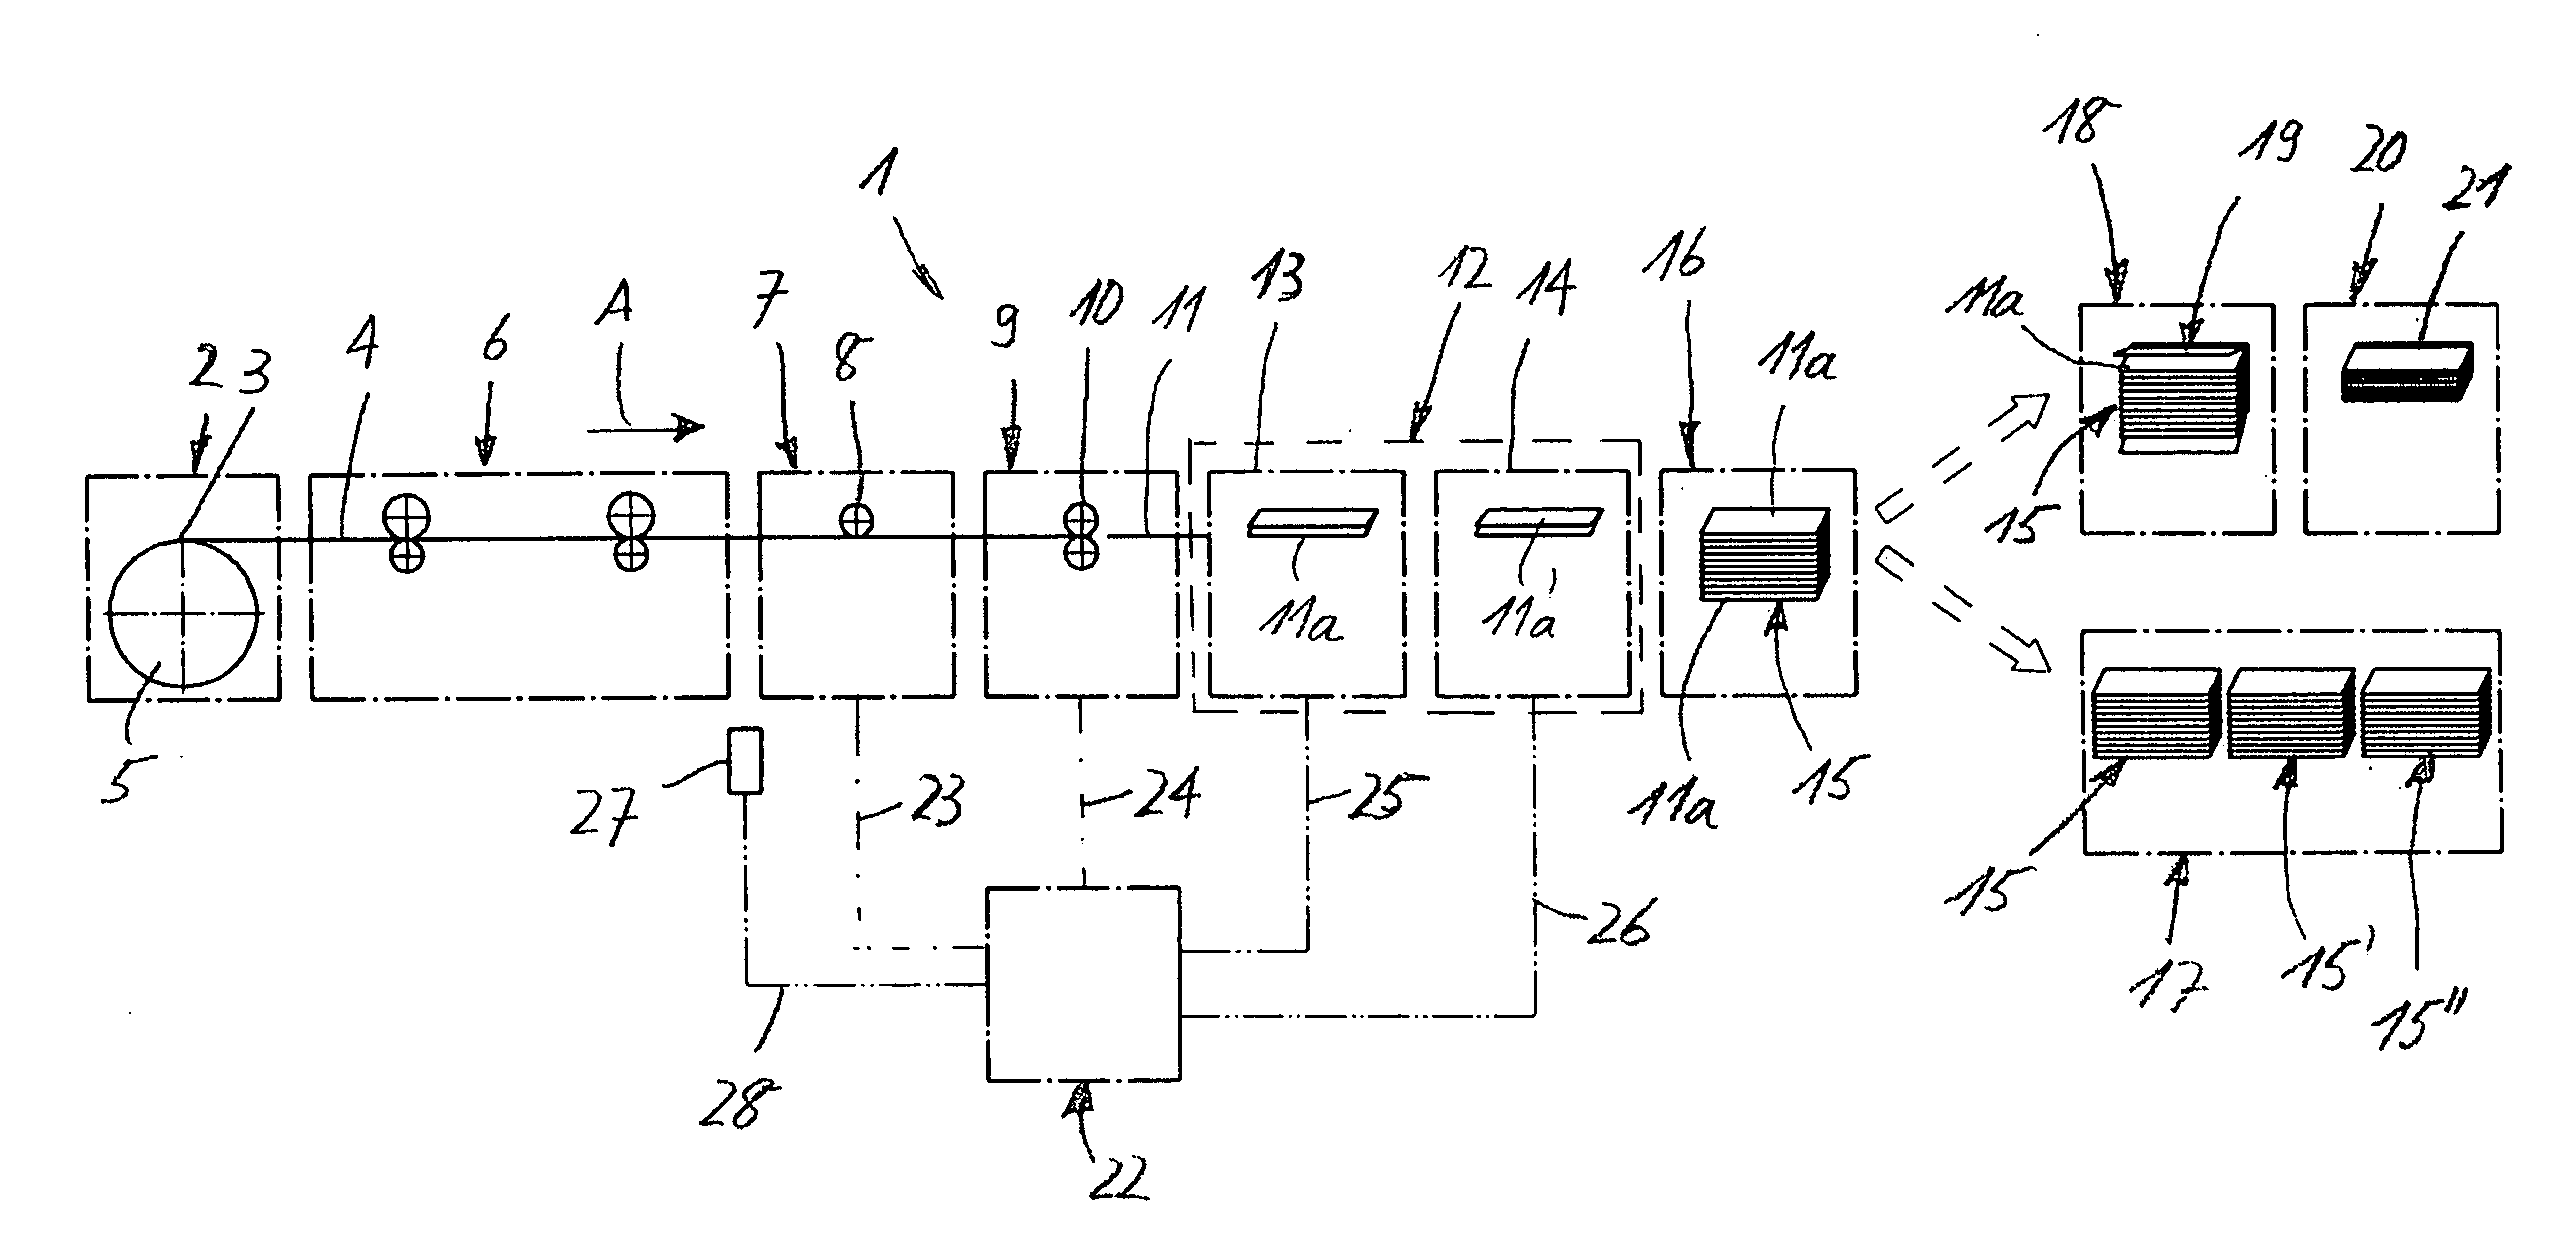 Method and a system for manufacturing printed products